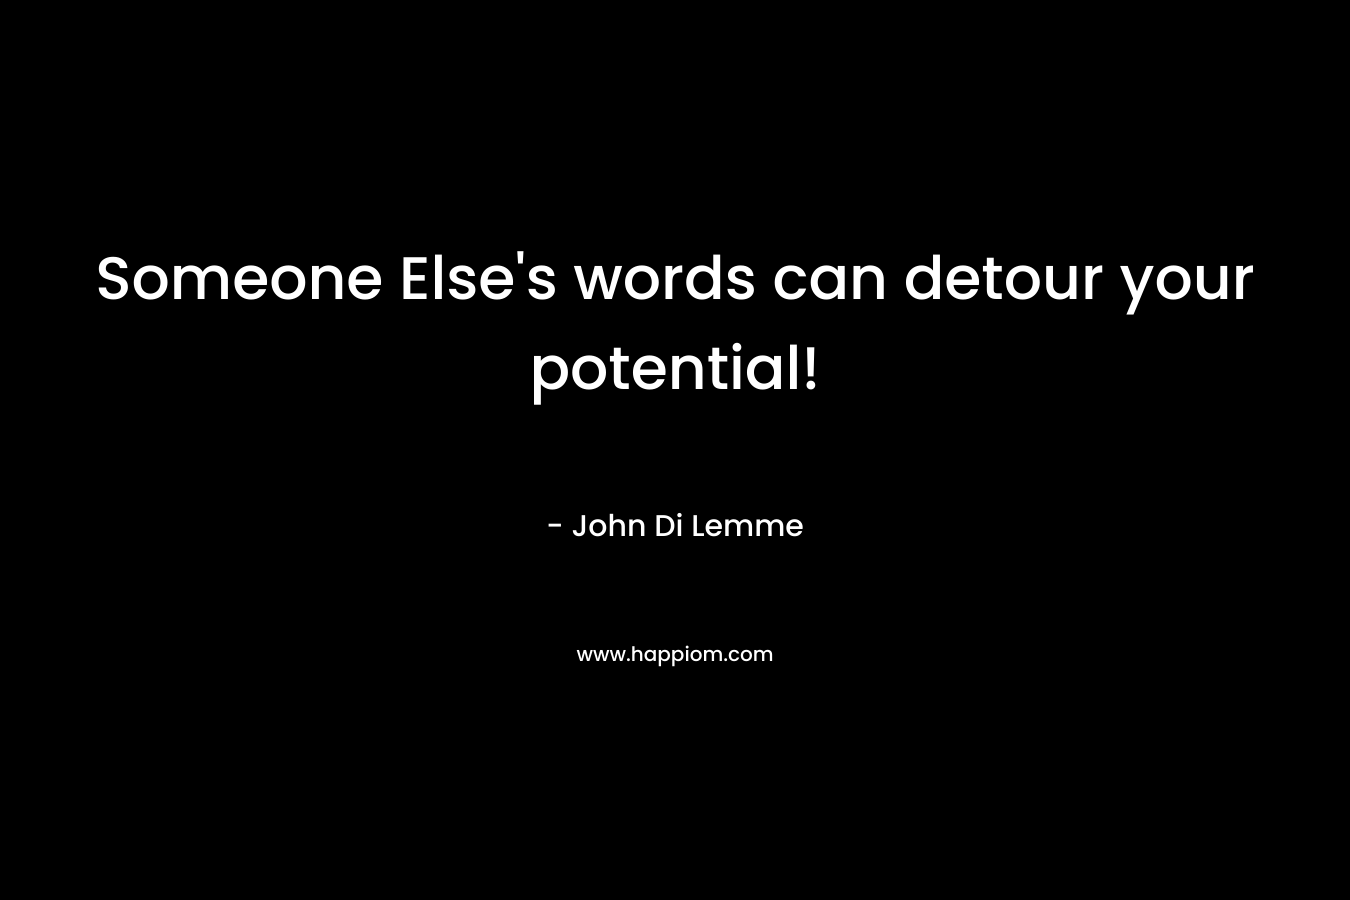 Someone Else's words can detour your potential!